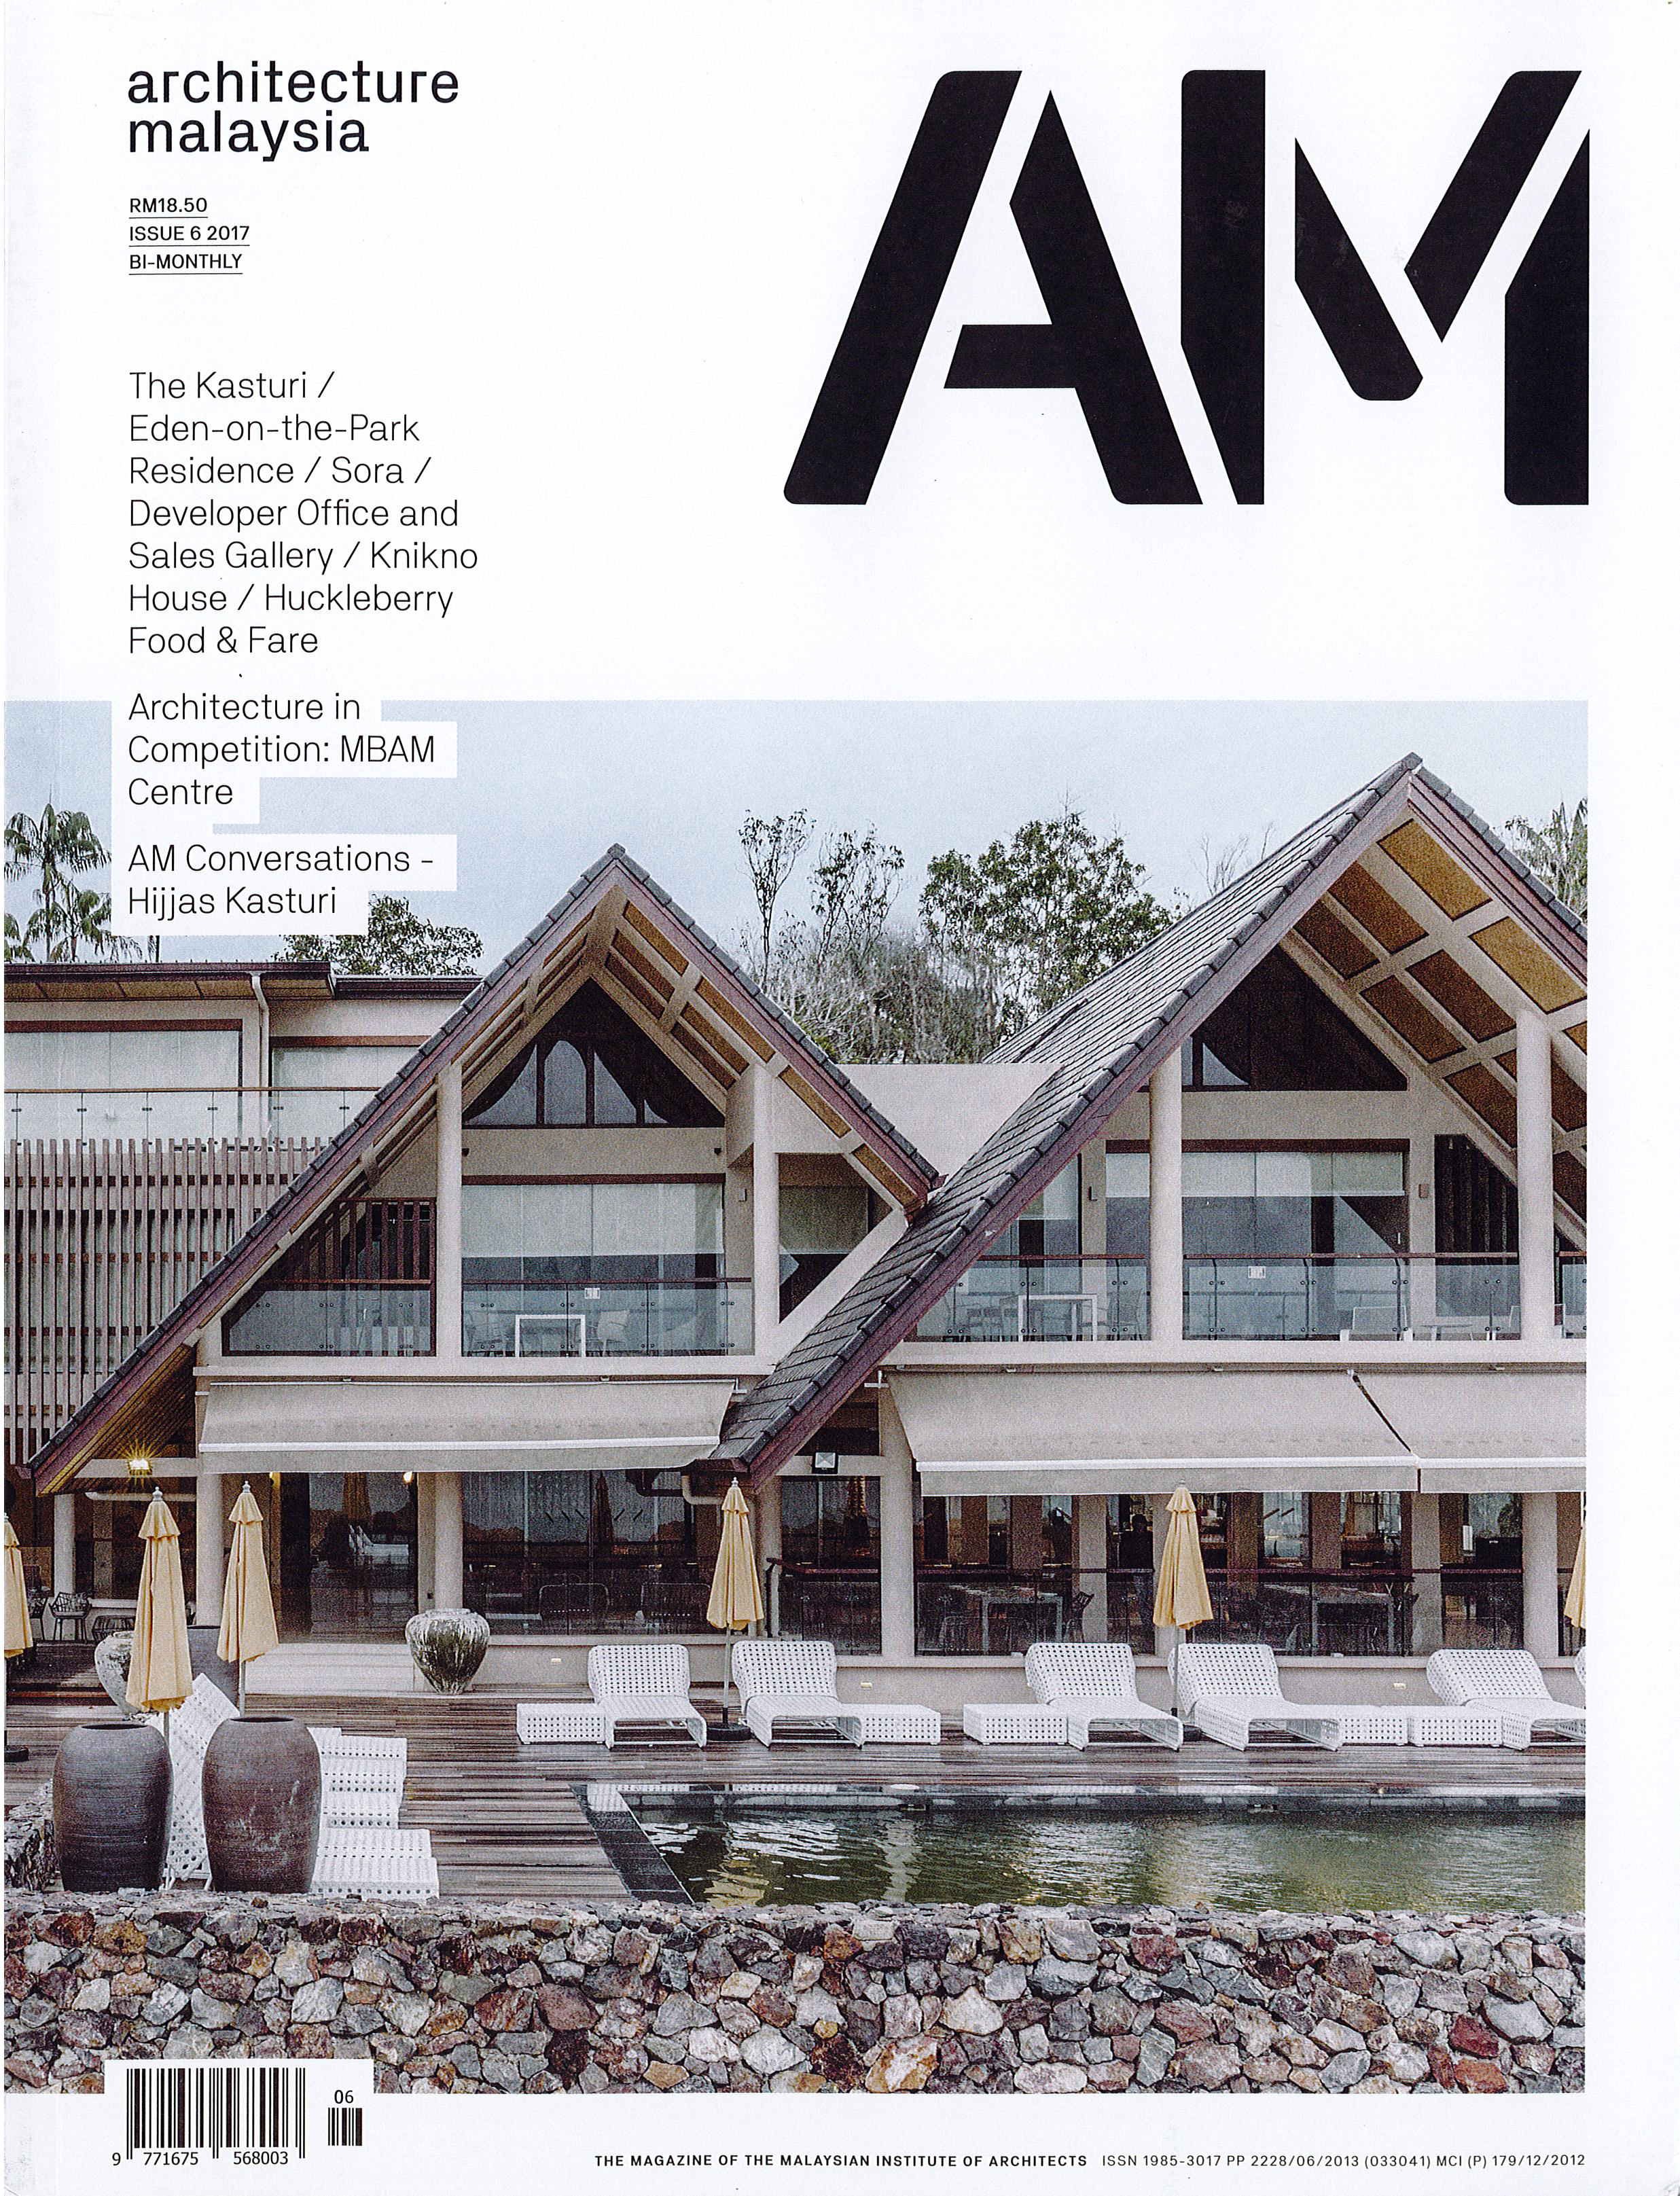 Architecture Malaysia - Issue 6 2017-1.jpg